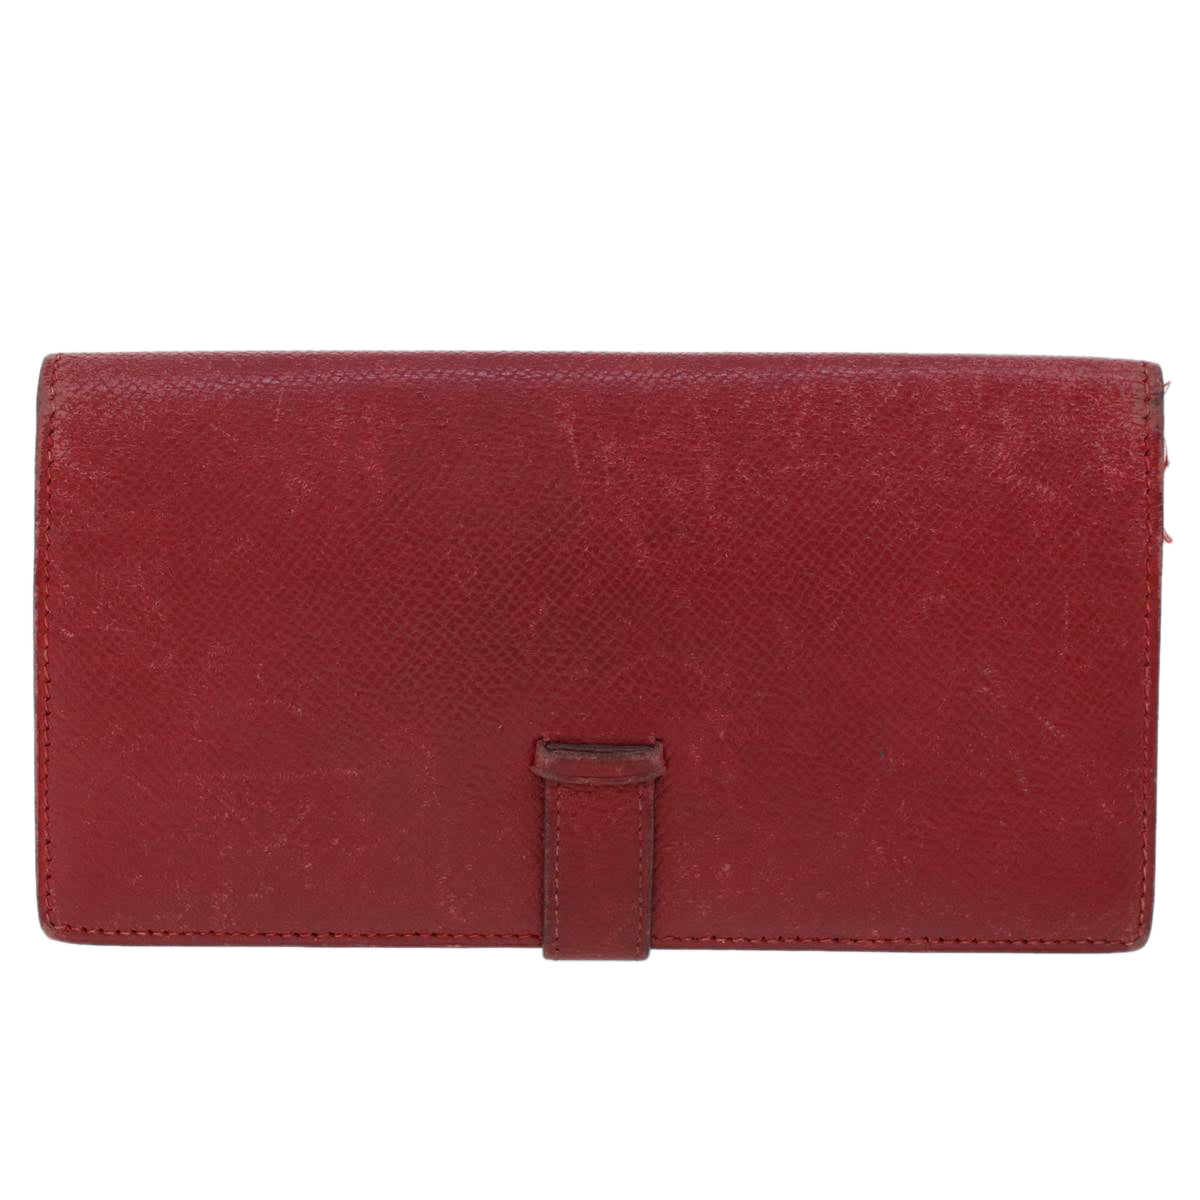 HERMES Bean Wallet Leather Red Auth yb127 - 0